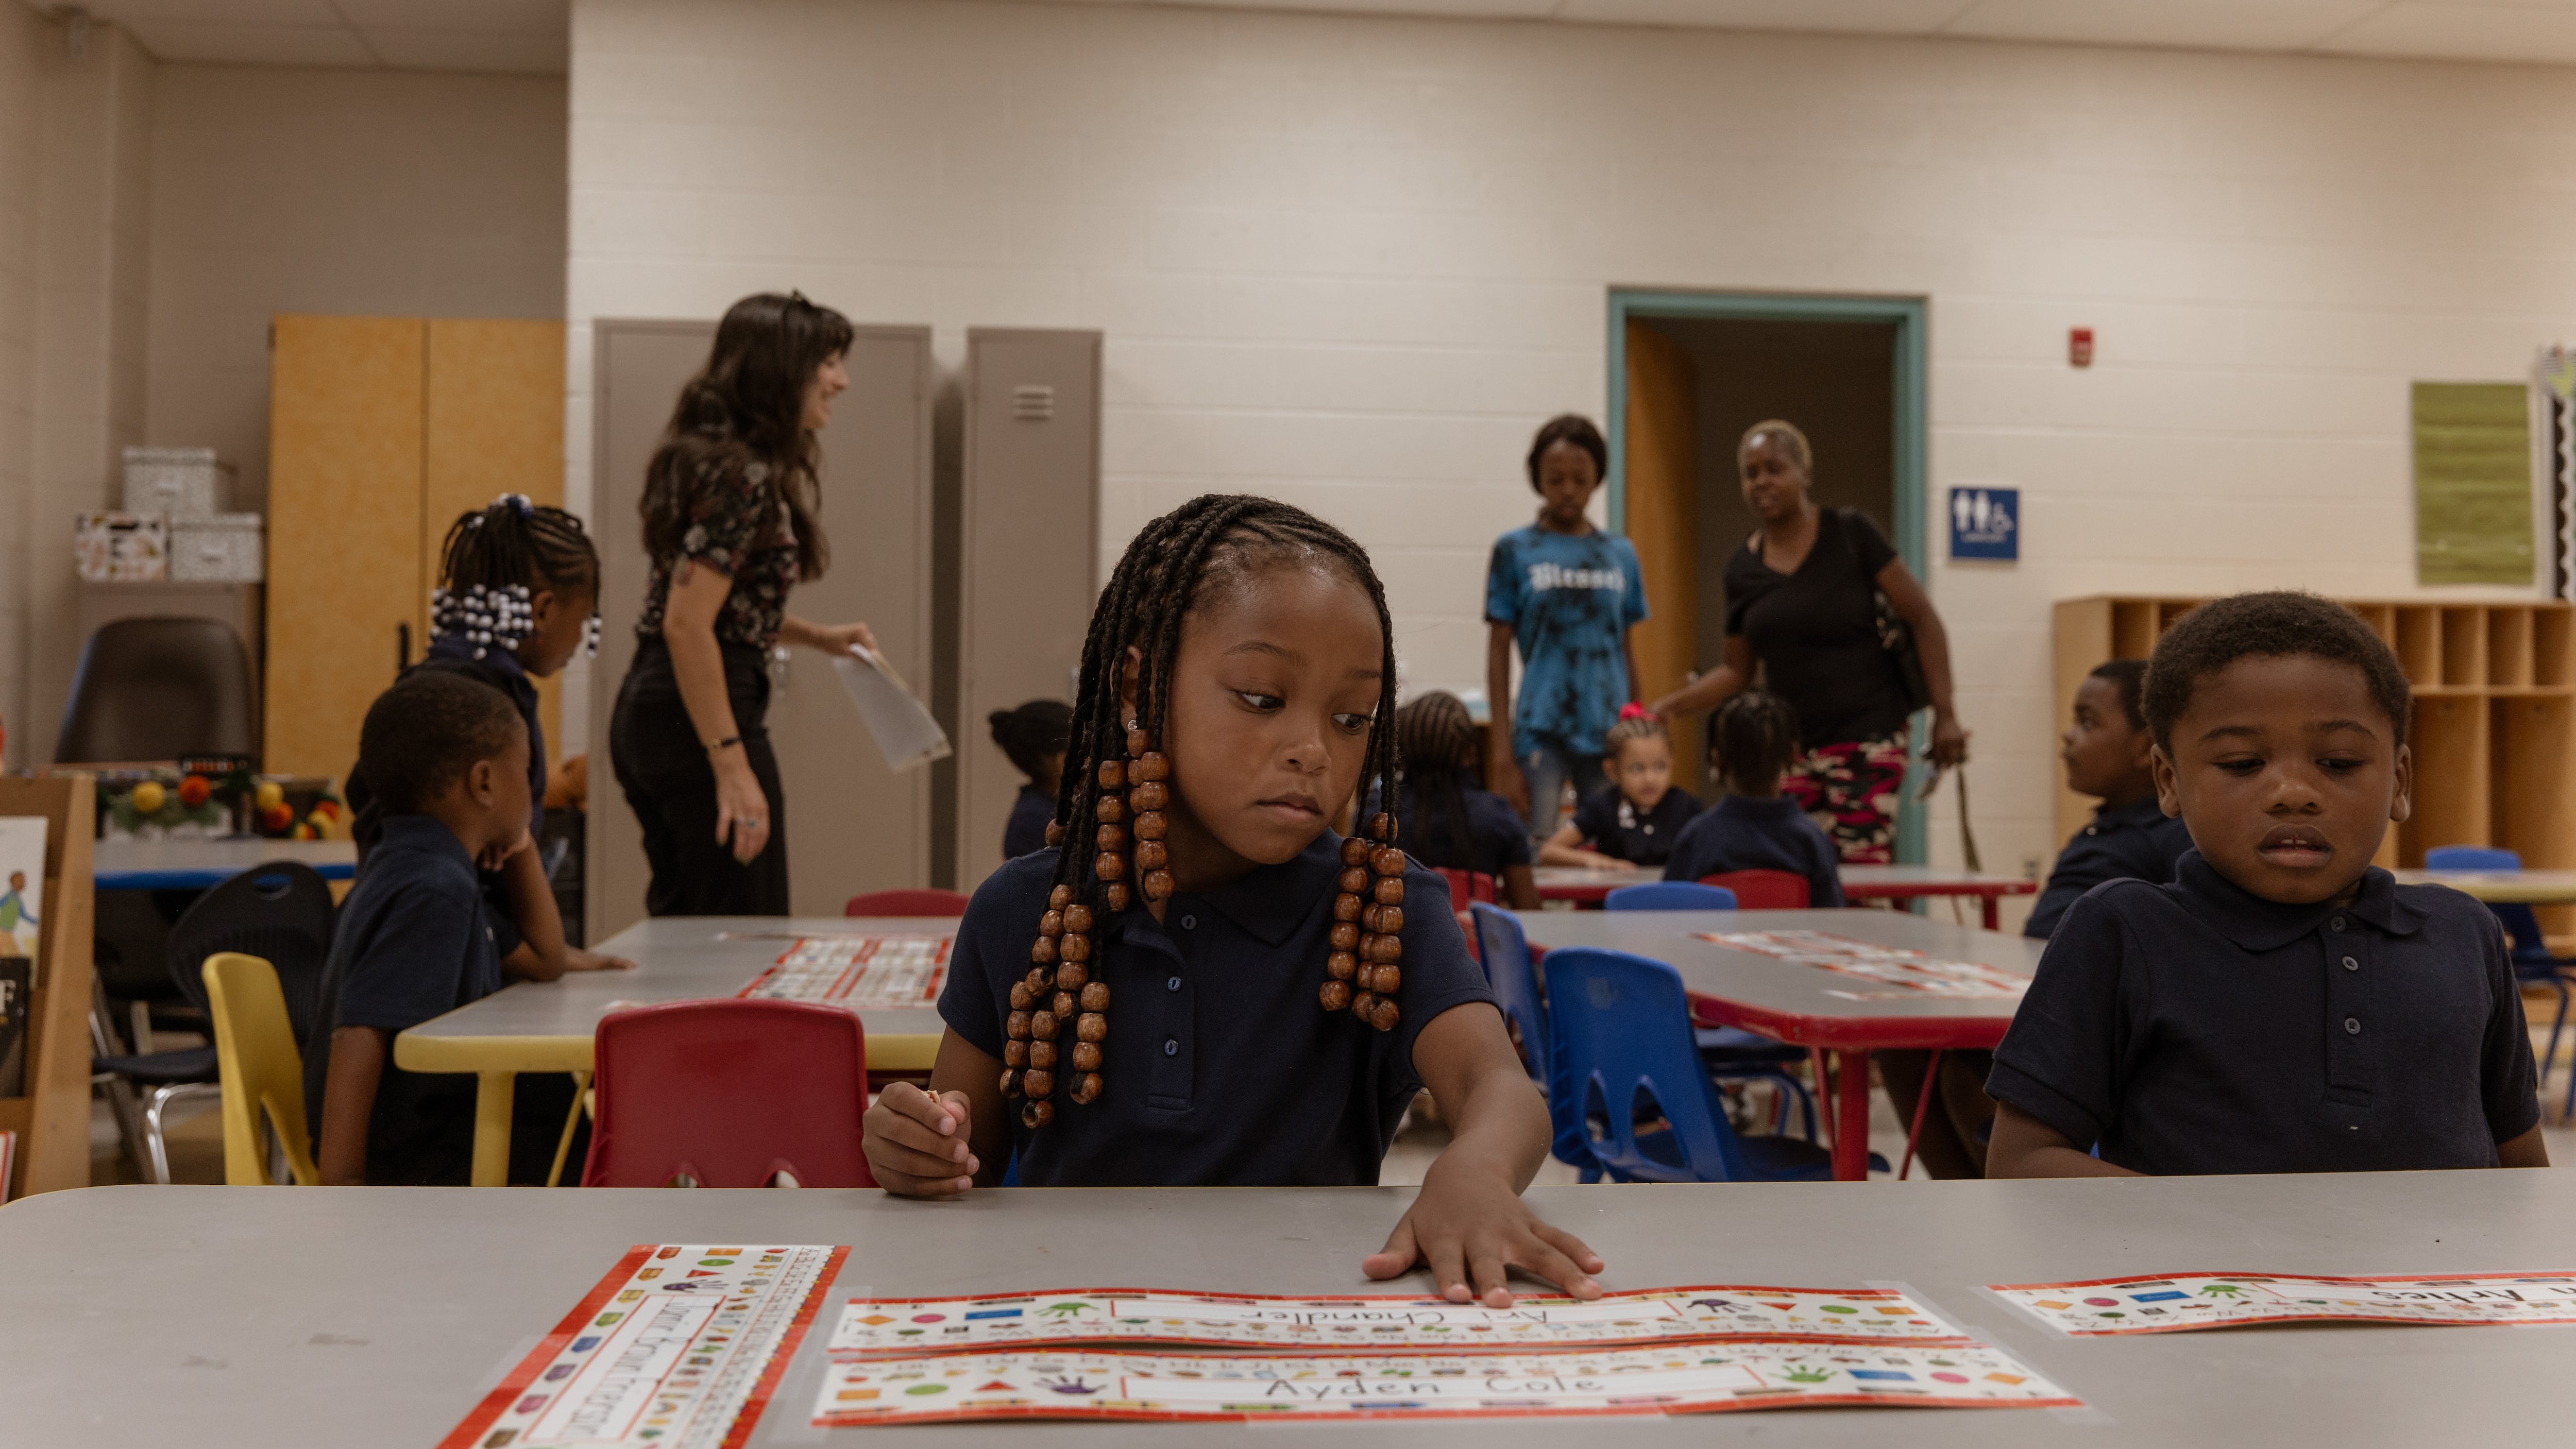 A girl with braids and a dark shirts puts her left hand on a table and looks to her left as a boy to her left in a dark shirt looks down at the table as people stand in the background. 